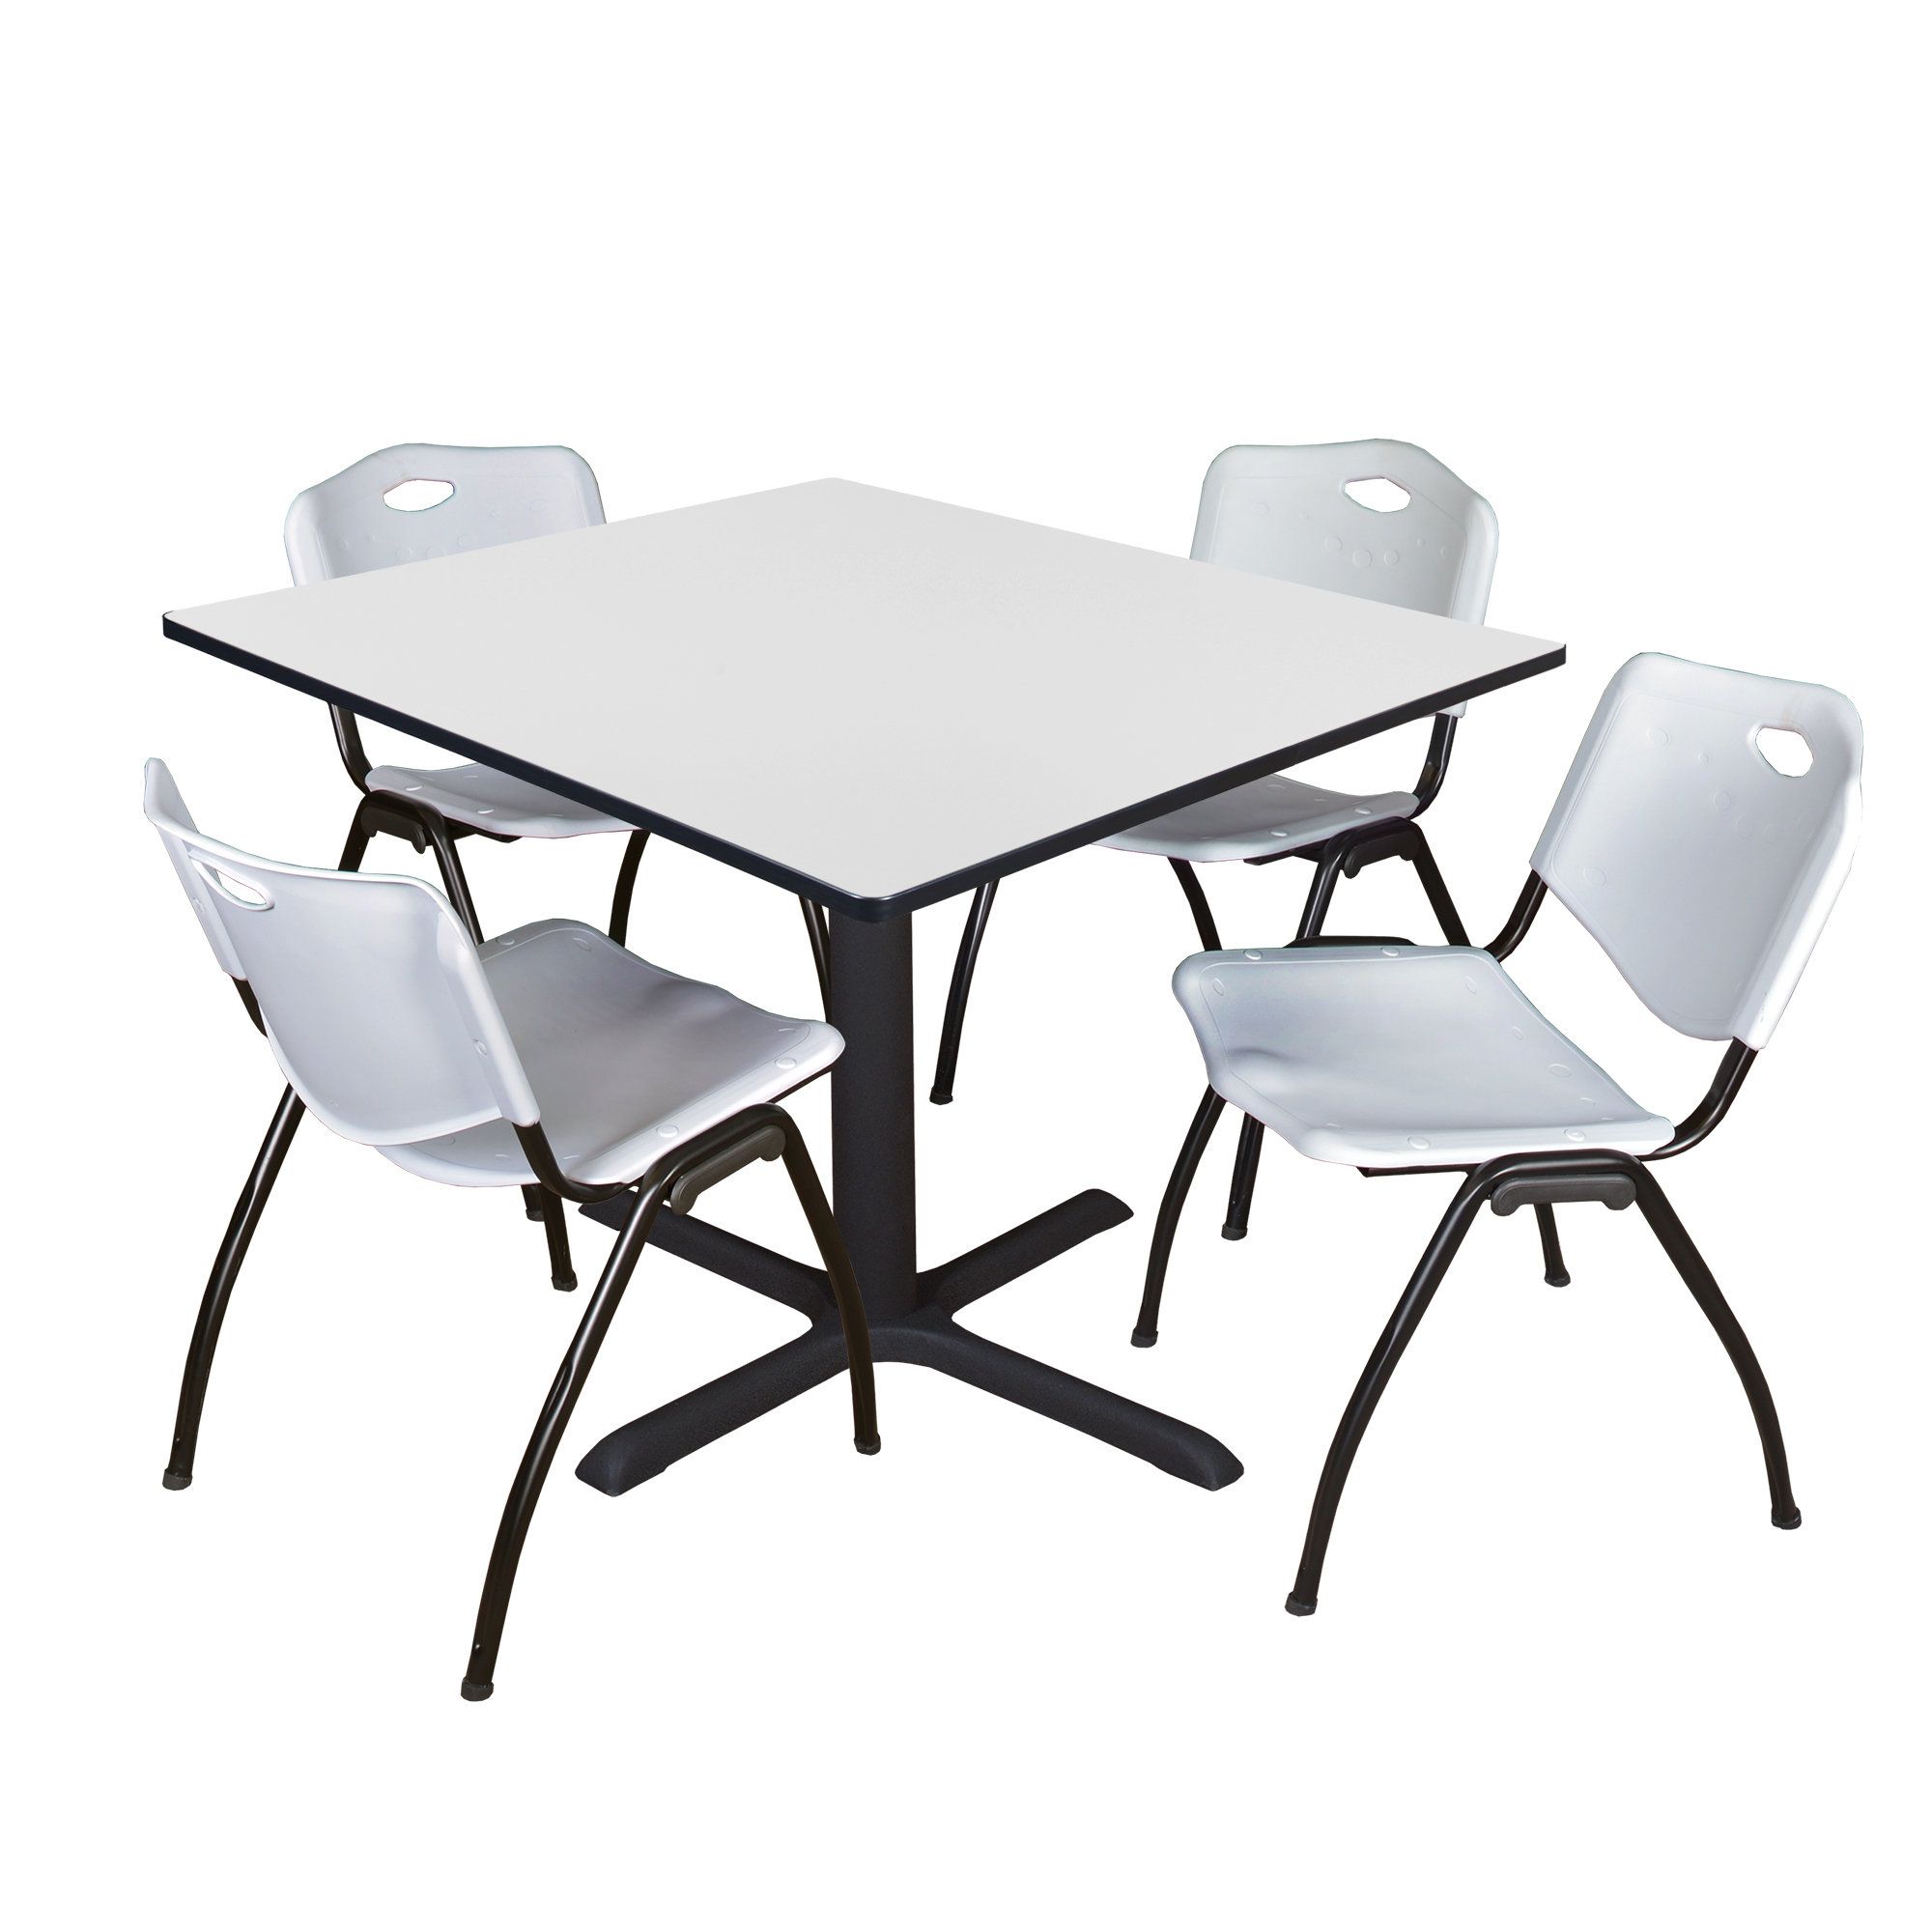 Regency Cain Square Breakroom Table & 4 M Stack Chairs | Wayfair Pertaining To Regency Cain Steel Coffee Tables (View 12 of 15)